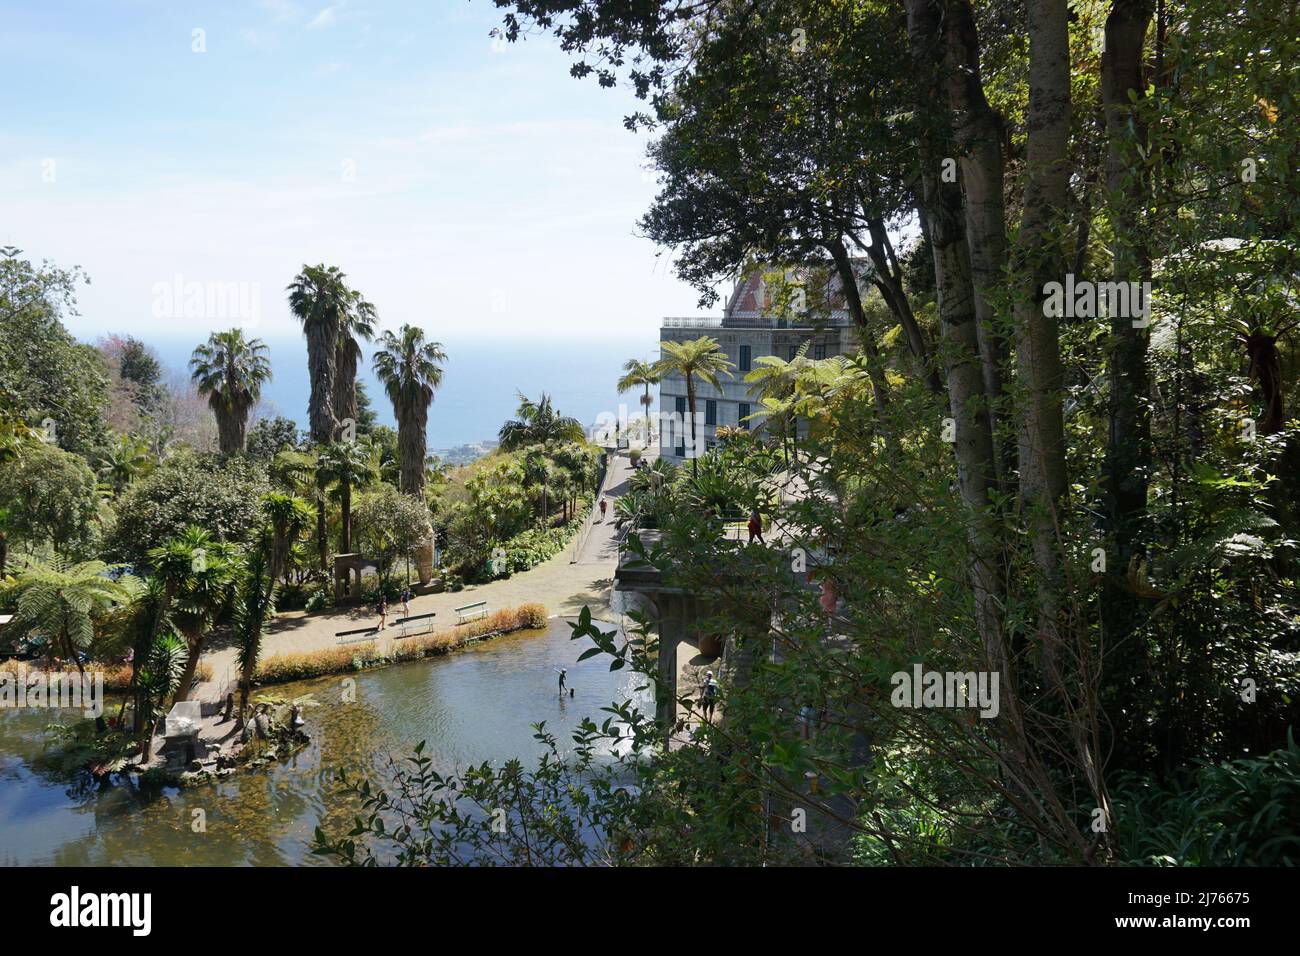 The Jardim Tropical Monte Palace in Monte, Funchal on Madeira island, Portugal, Europe. Photo by Matheisl Stock Photo